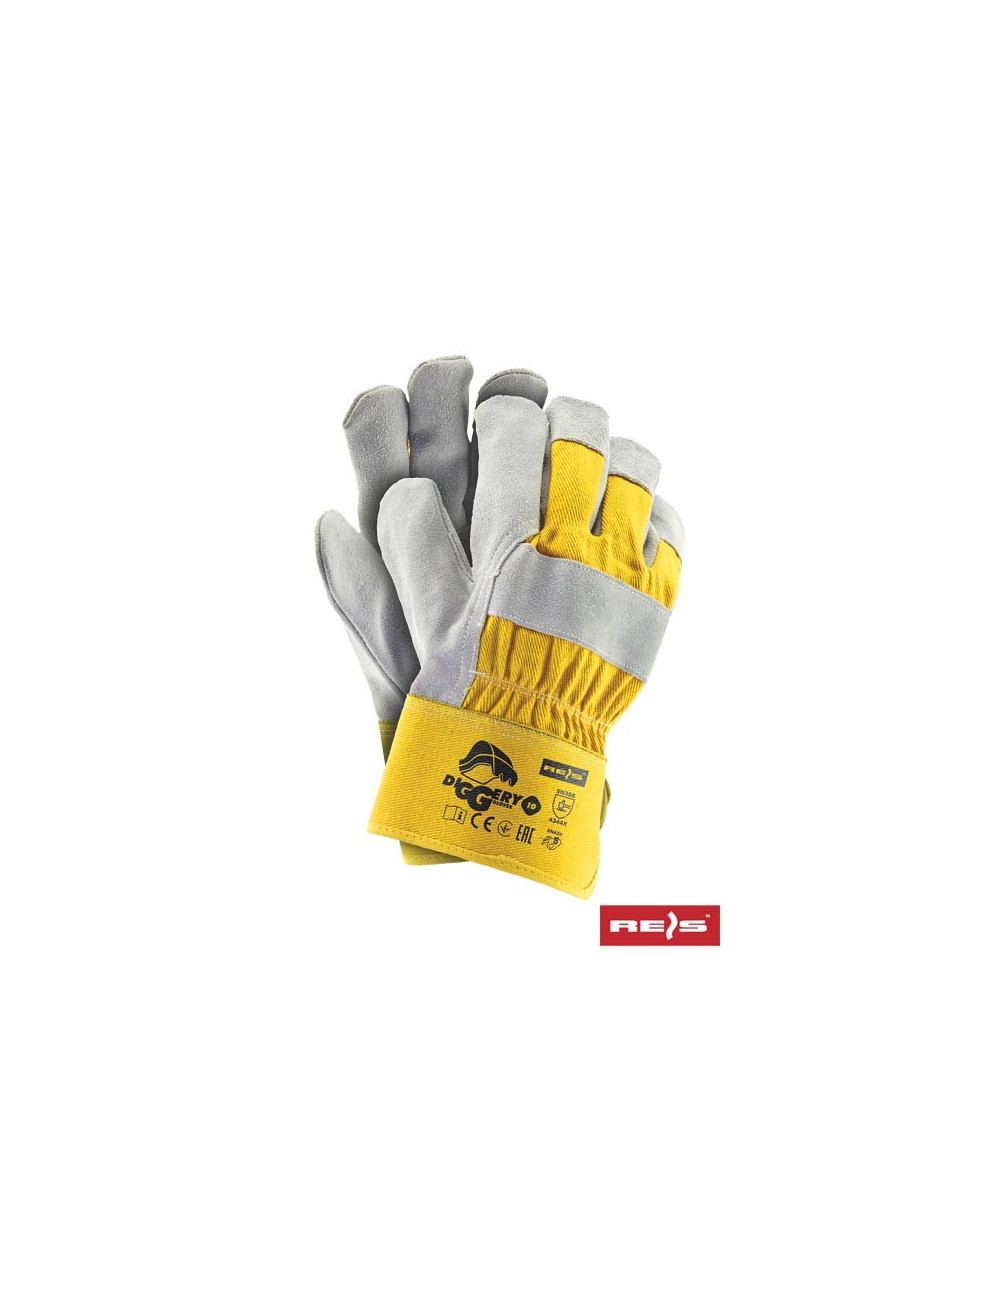 Protective gloves diggers yjs yellow-light gray Reis